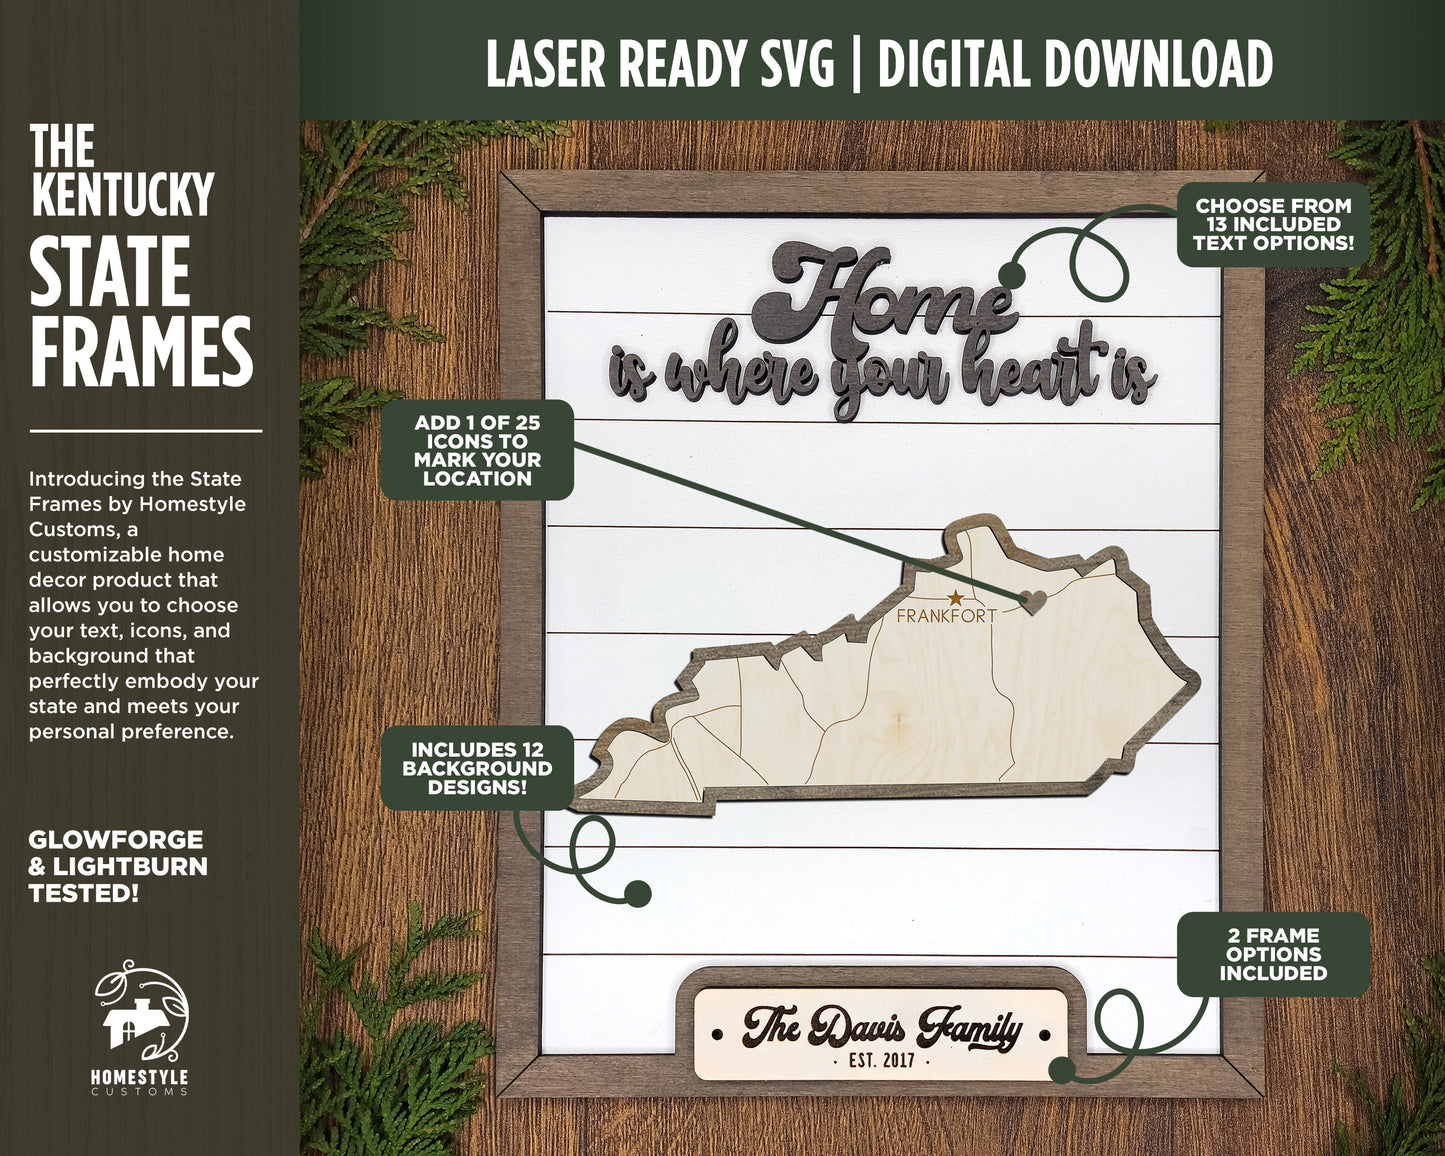 The Kentucky State Frame - 13 text options, 12 backgrounds, 25 icons Included - Make over 7,500 designs - Glowforge & Lightburn Tested